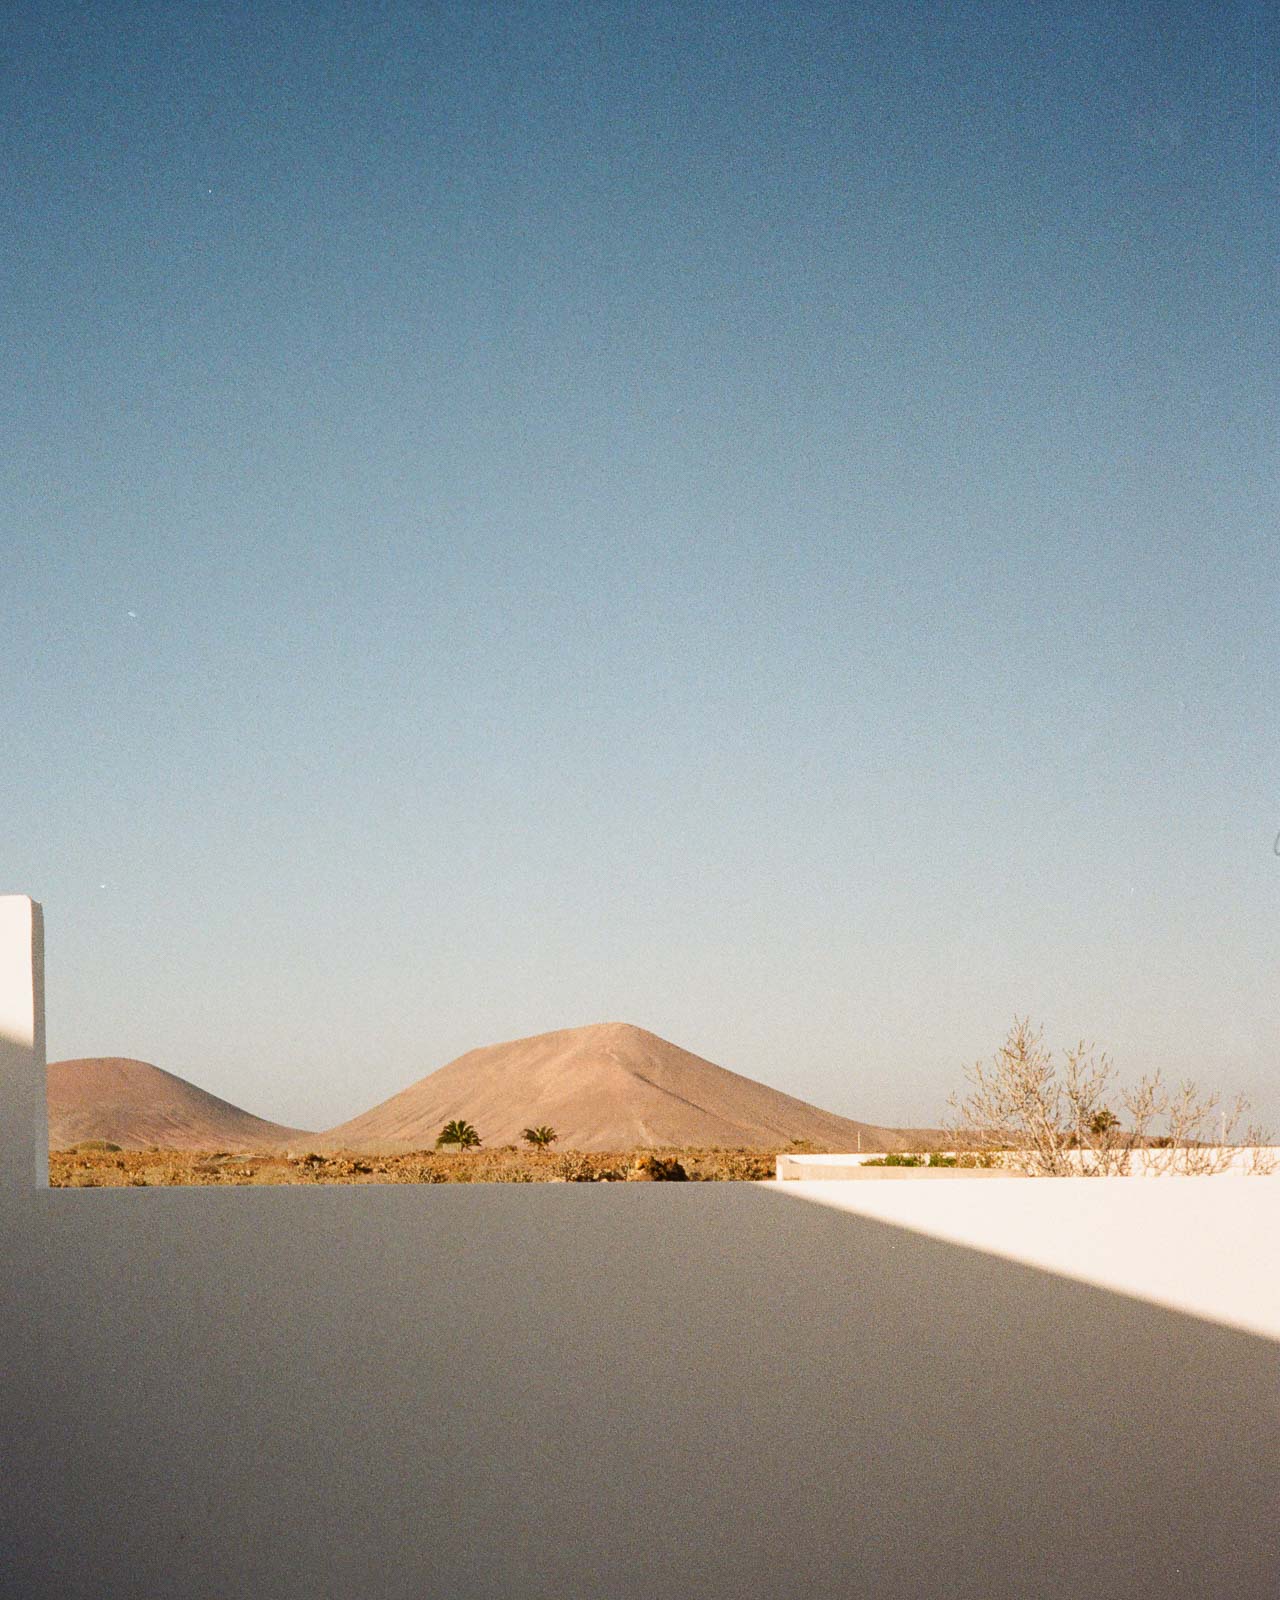 analog diary 2020 by storm wes shot with yasica t4 on Kodak gold film in Lanzarote